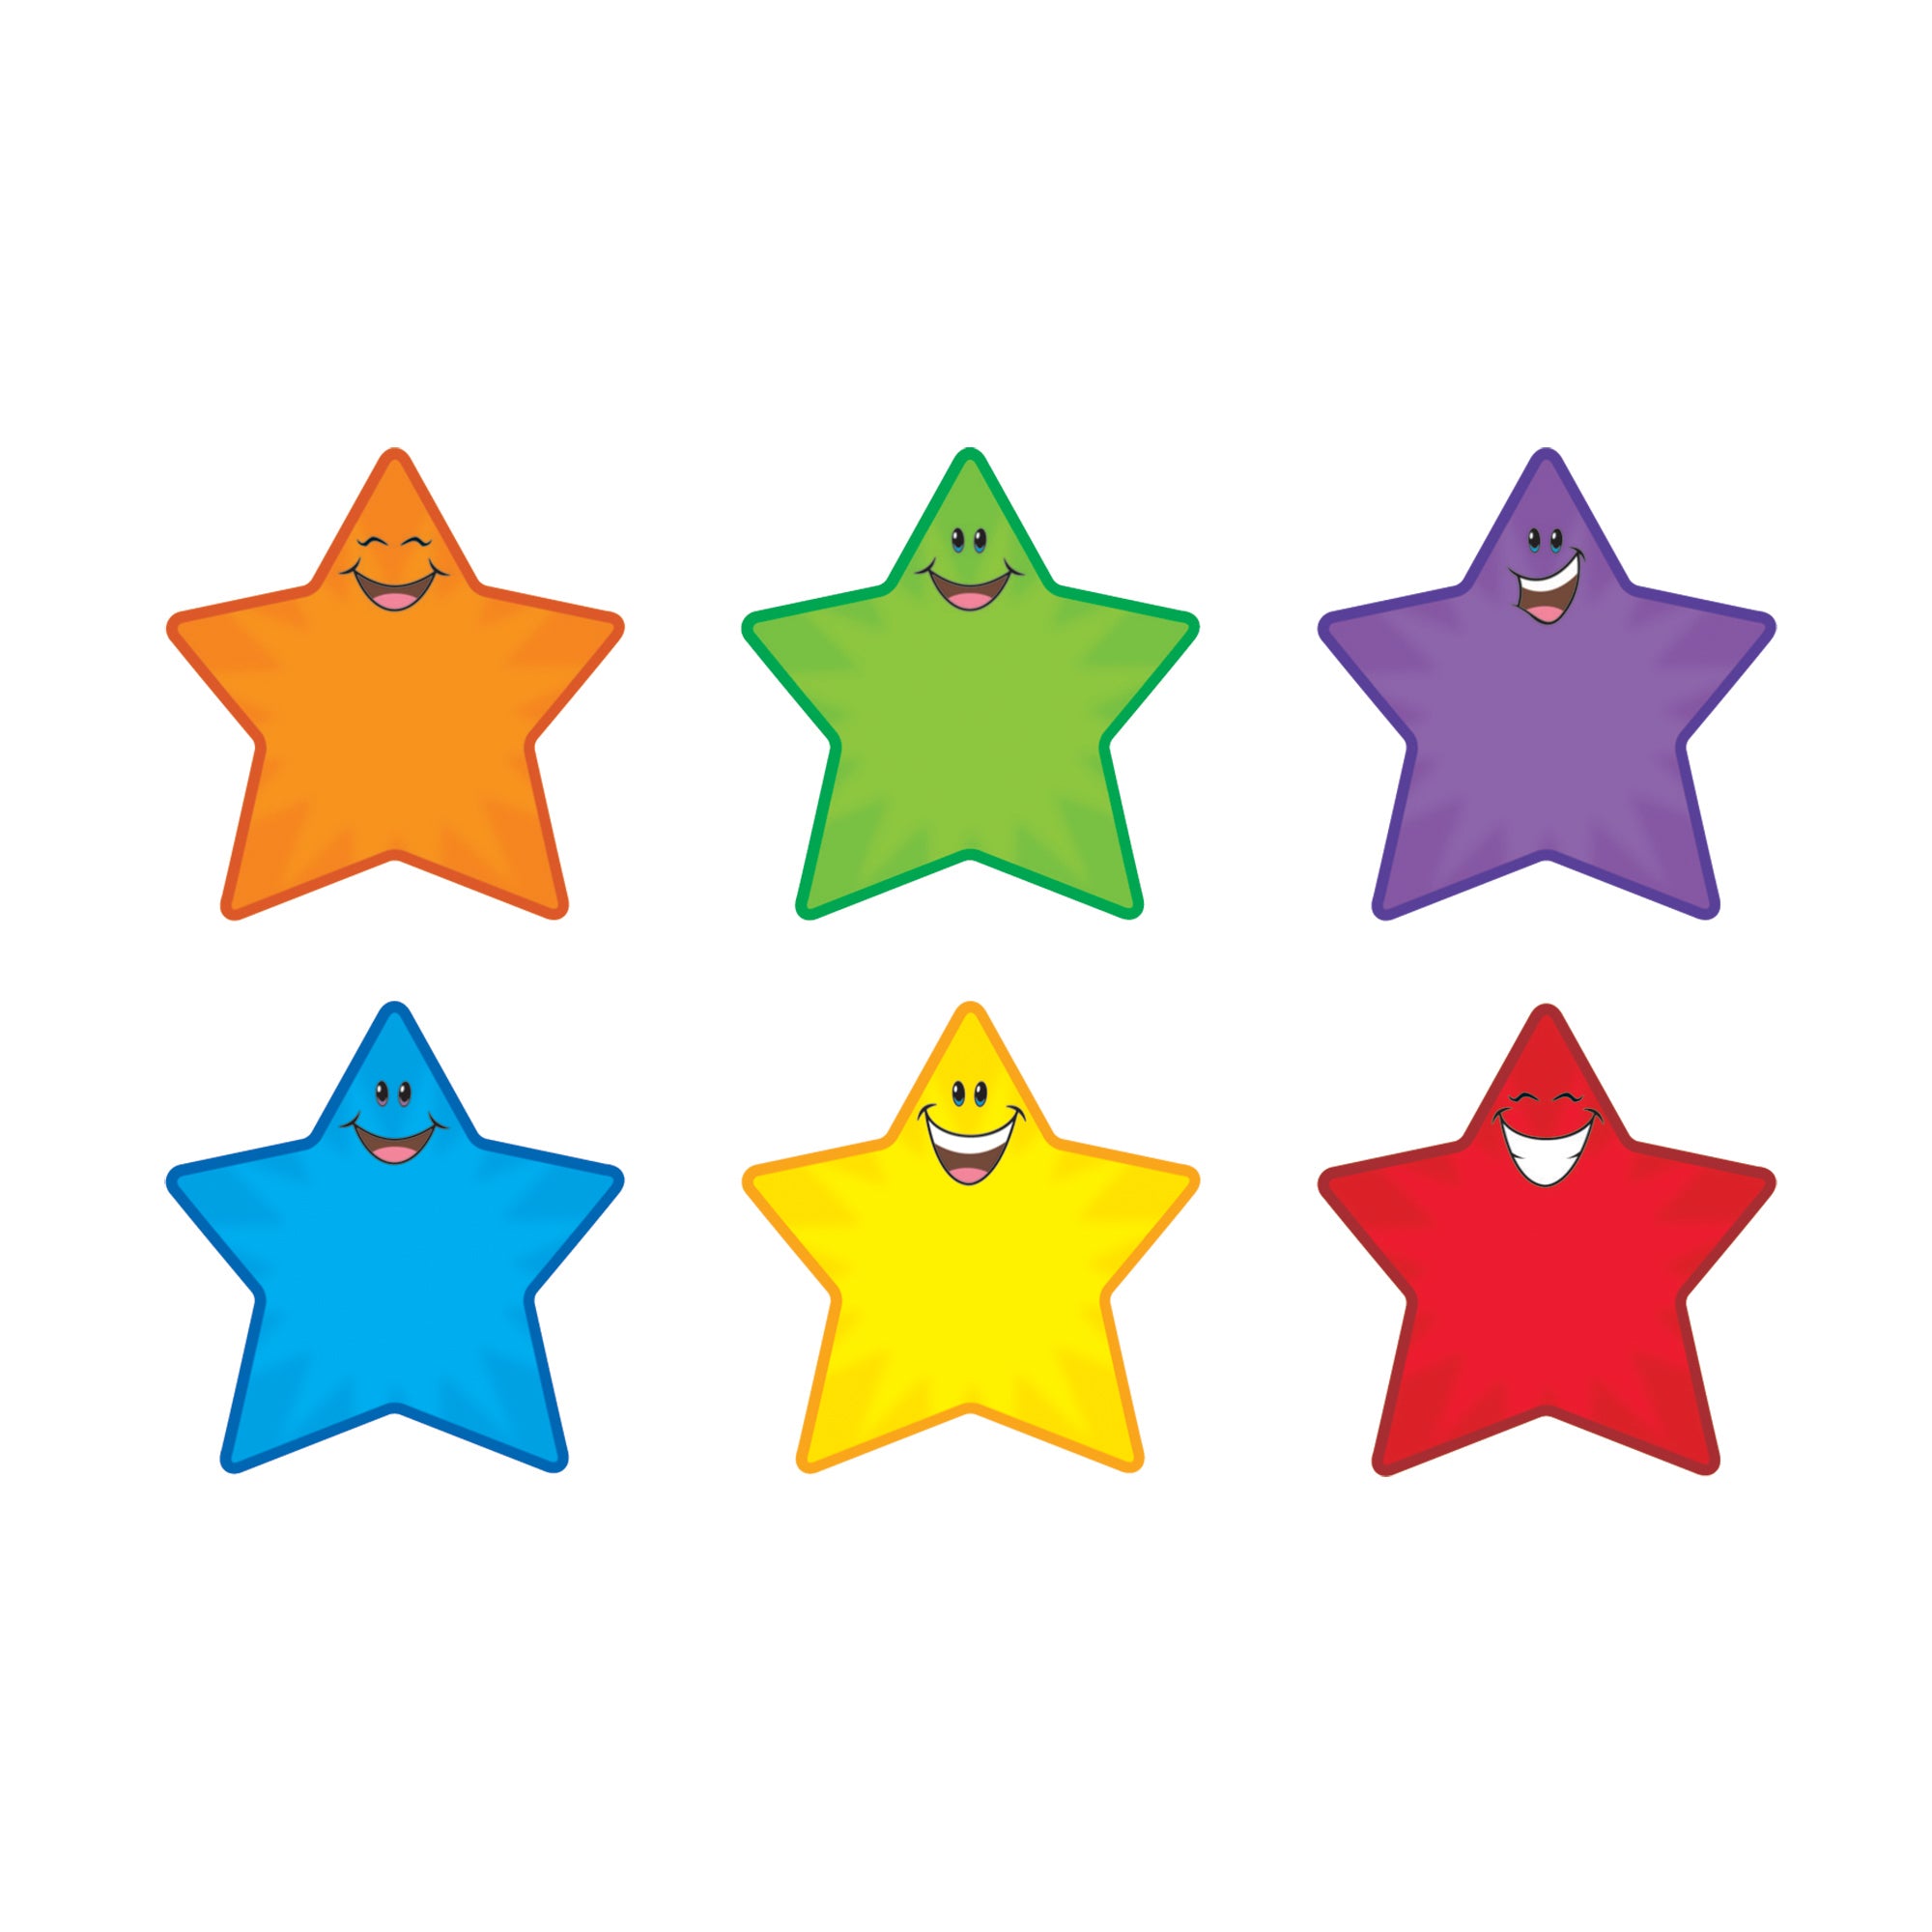 Star Smiles Classic Accents® Variety Pack, 36 Per Pack, 3 Packs